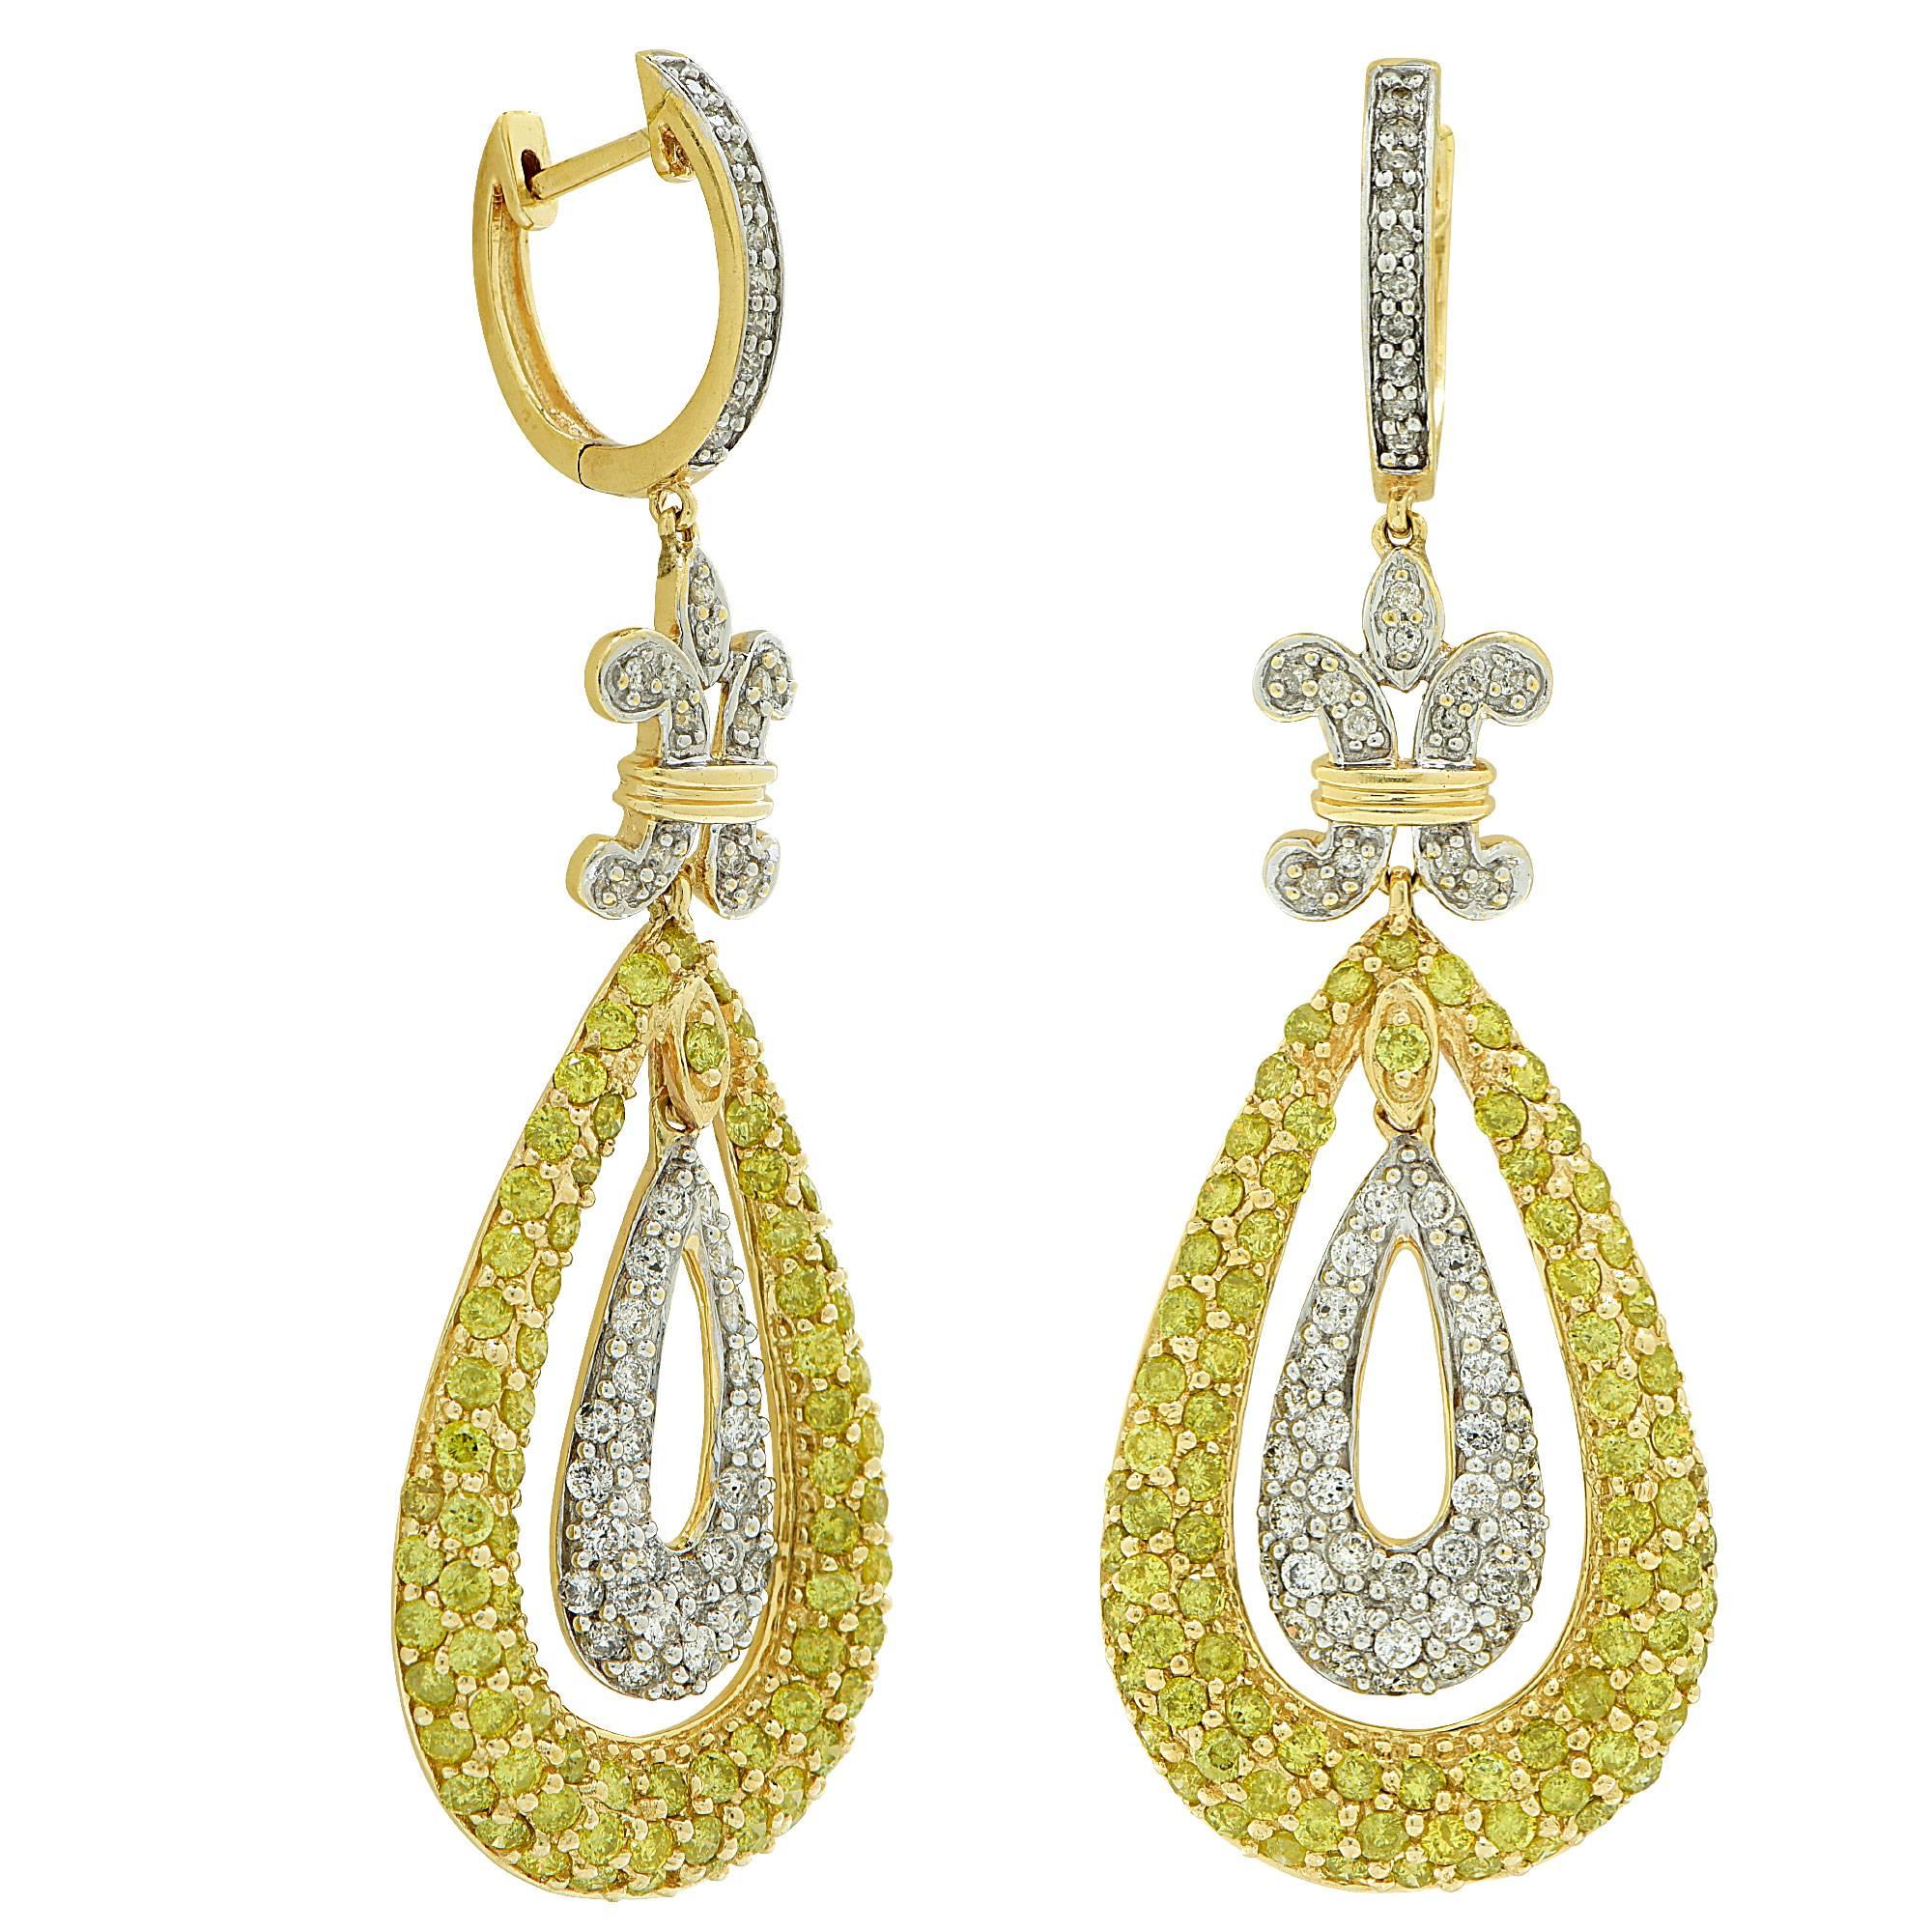 14k white and yellow gold earrings featuring 112 round brilliant cut diamonds weighing approximately 1.25cts total G color I1 clarity accented by 166 round brilliant cut irradiated yellow diamonds I1 clarity.

The earrings measure 2.24 inch by .77